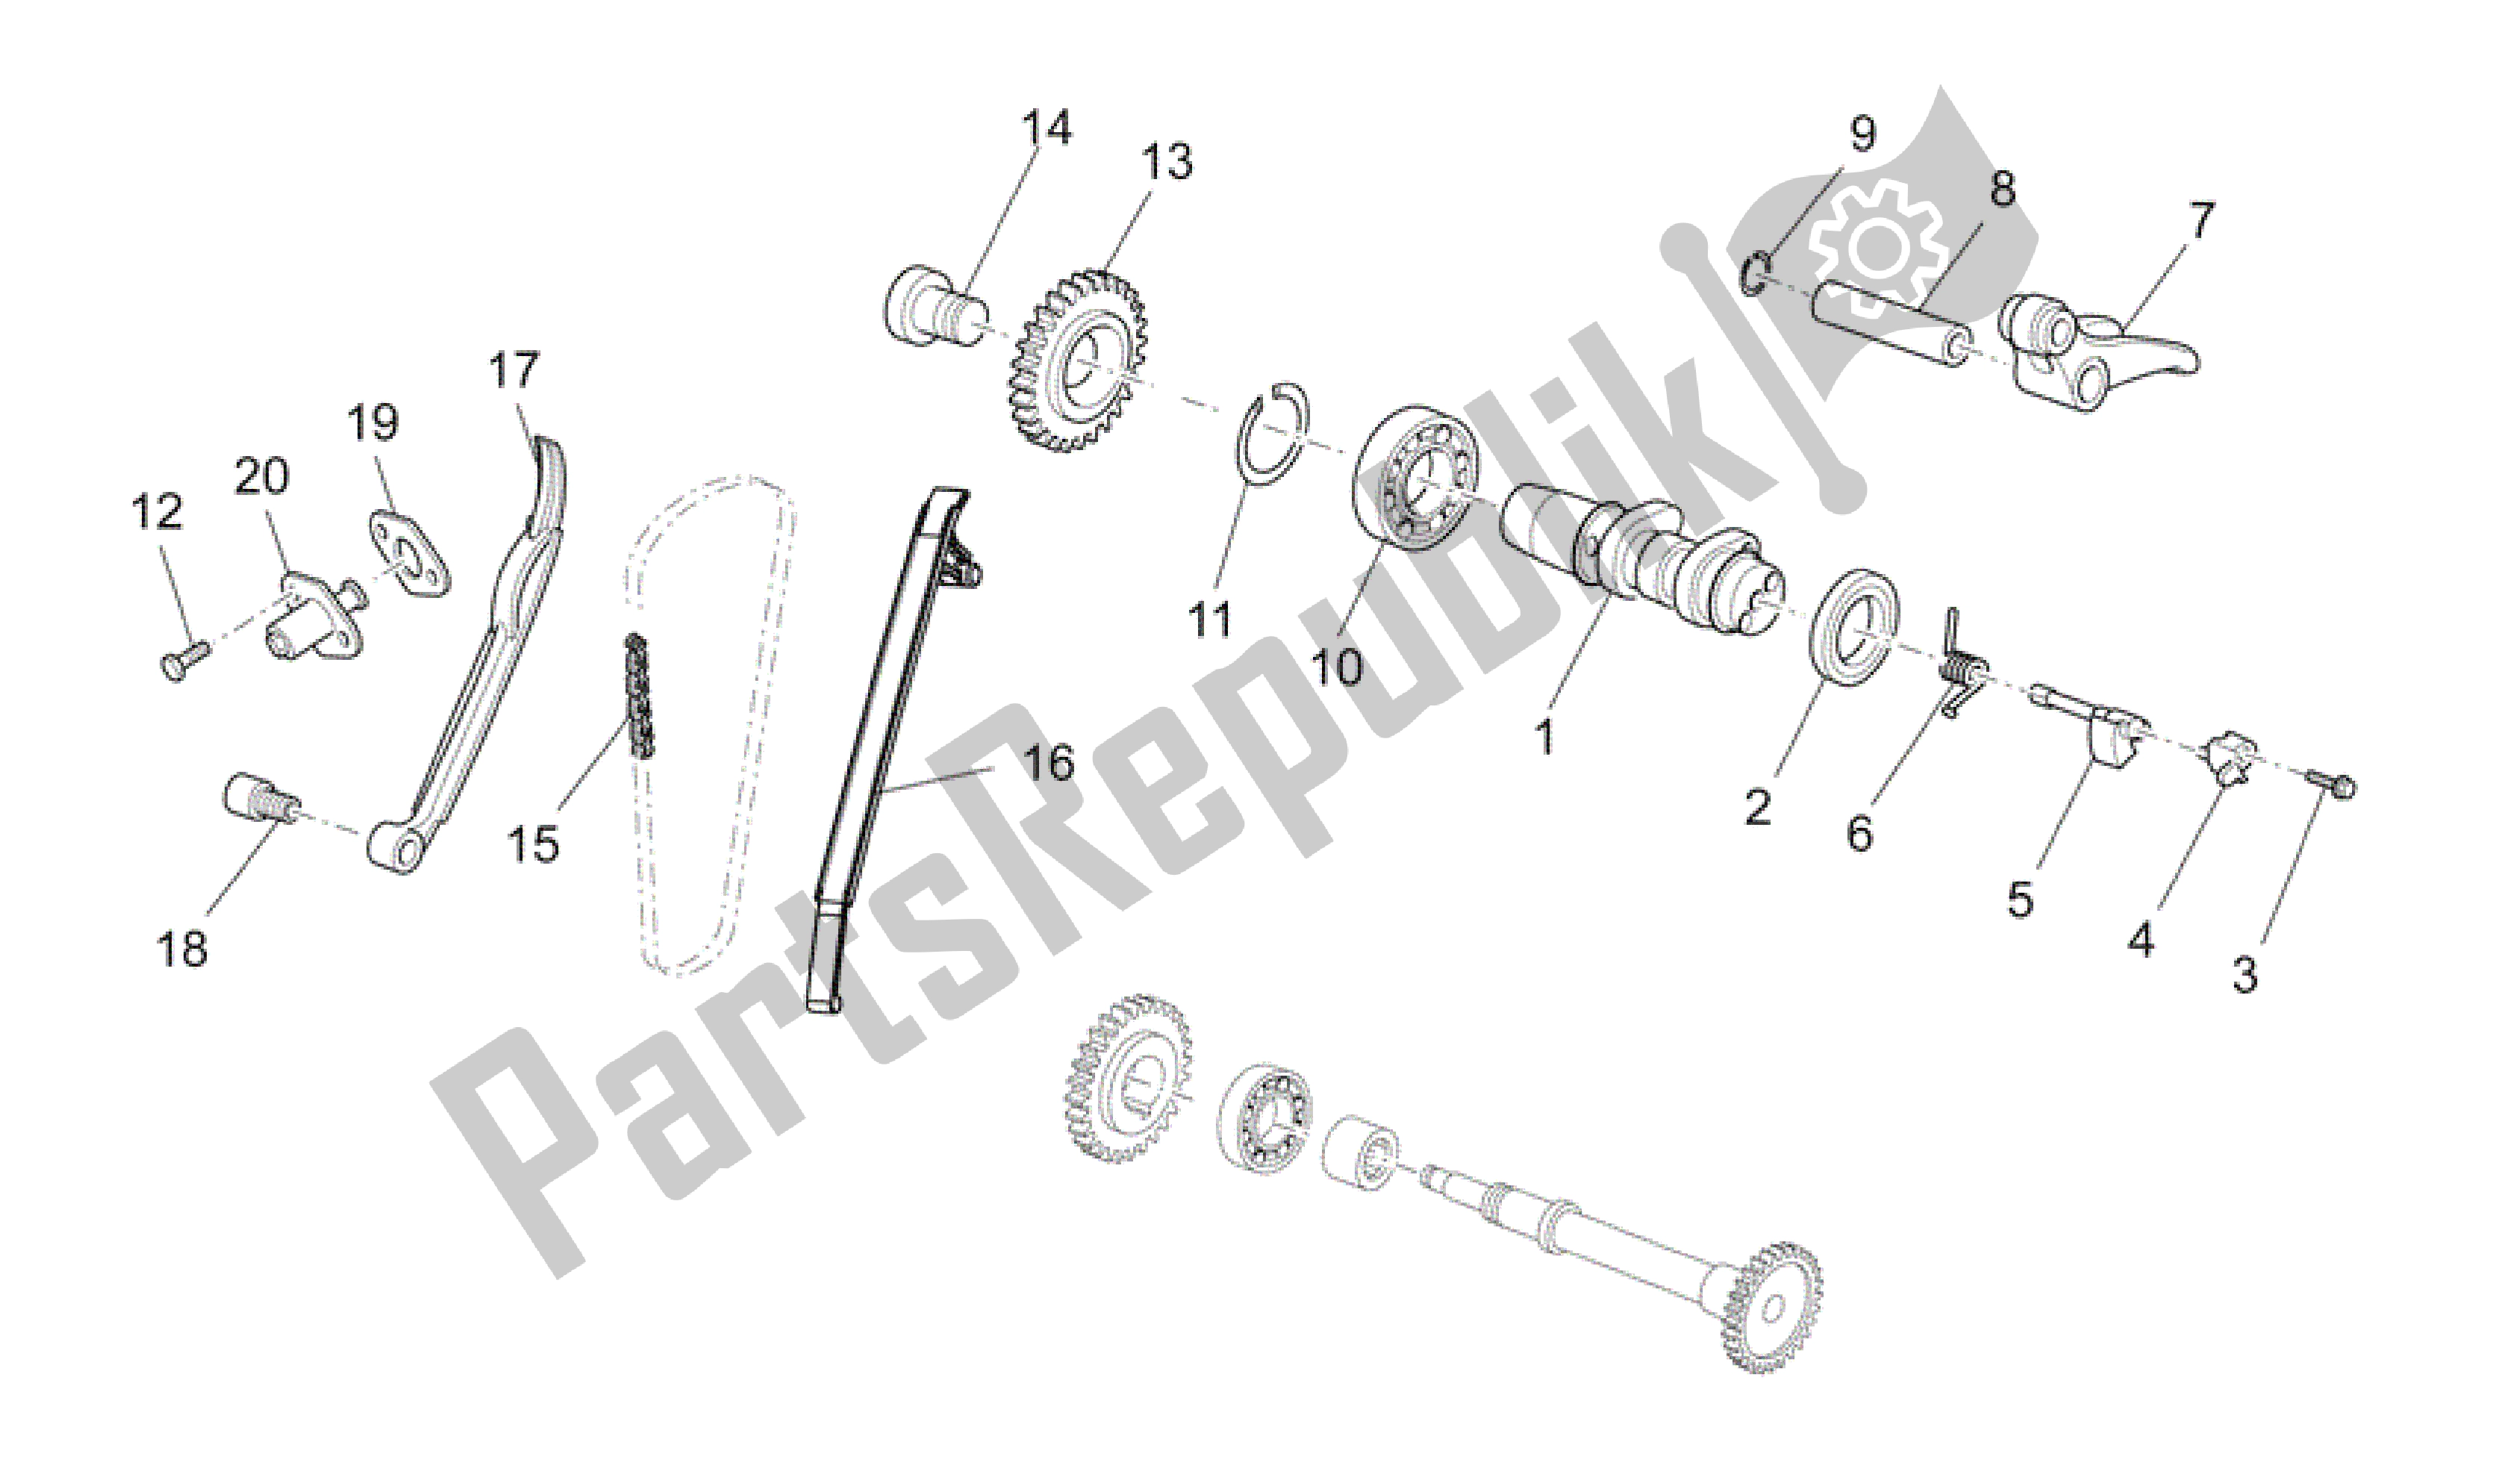 All parts for the Rear Cylinder Timing System of the Aprilia RXV 450 2009 - 2011